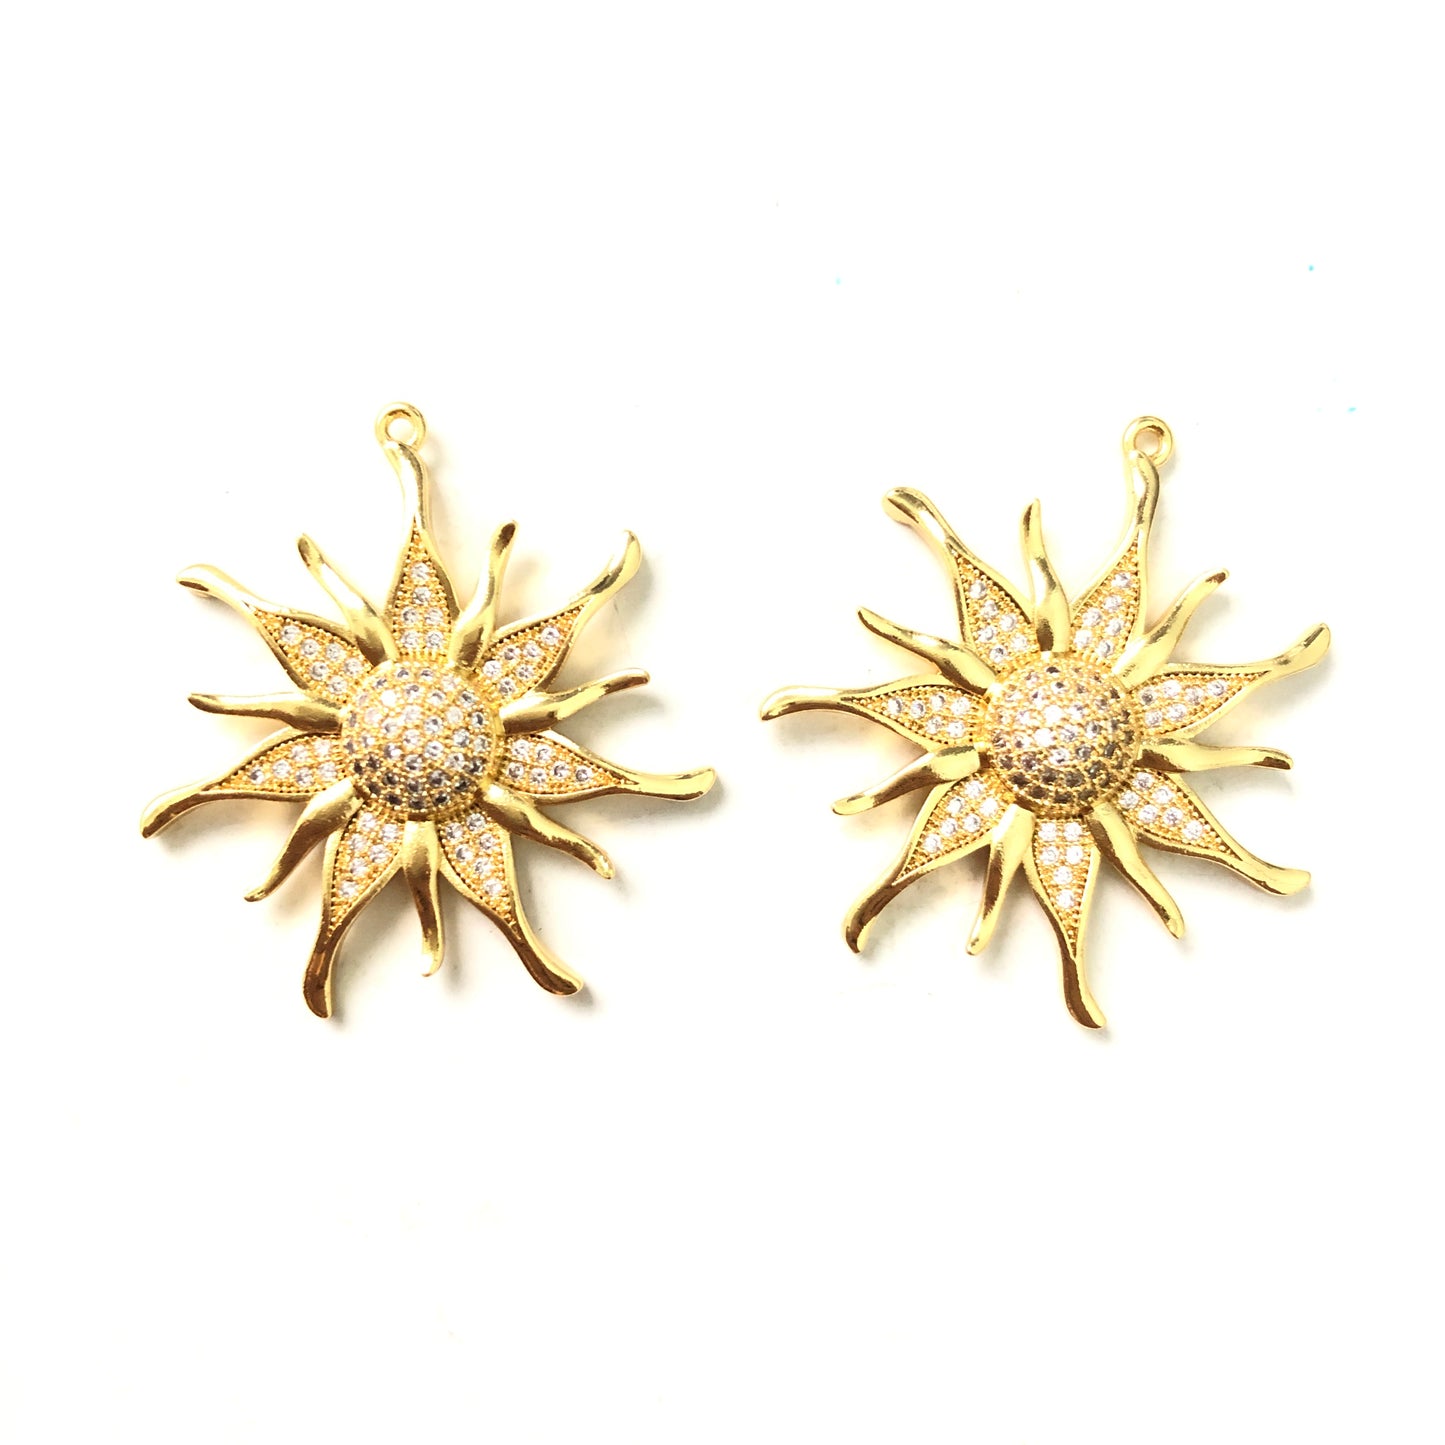 10pcs/lot 35mm CZ Paved Sunflower Charms Gold CZ Paved Charms Large Sizes Sun Moon Stars Charms Beads Beyond